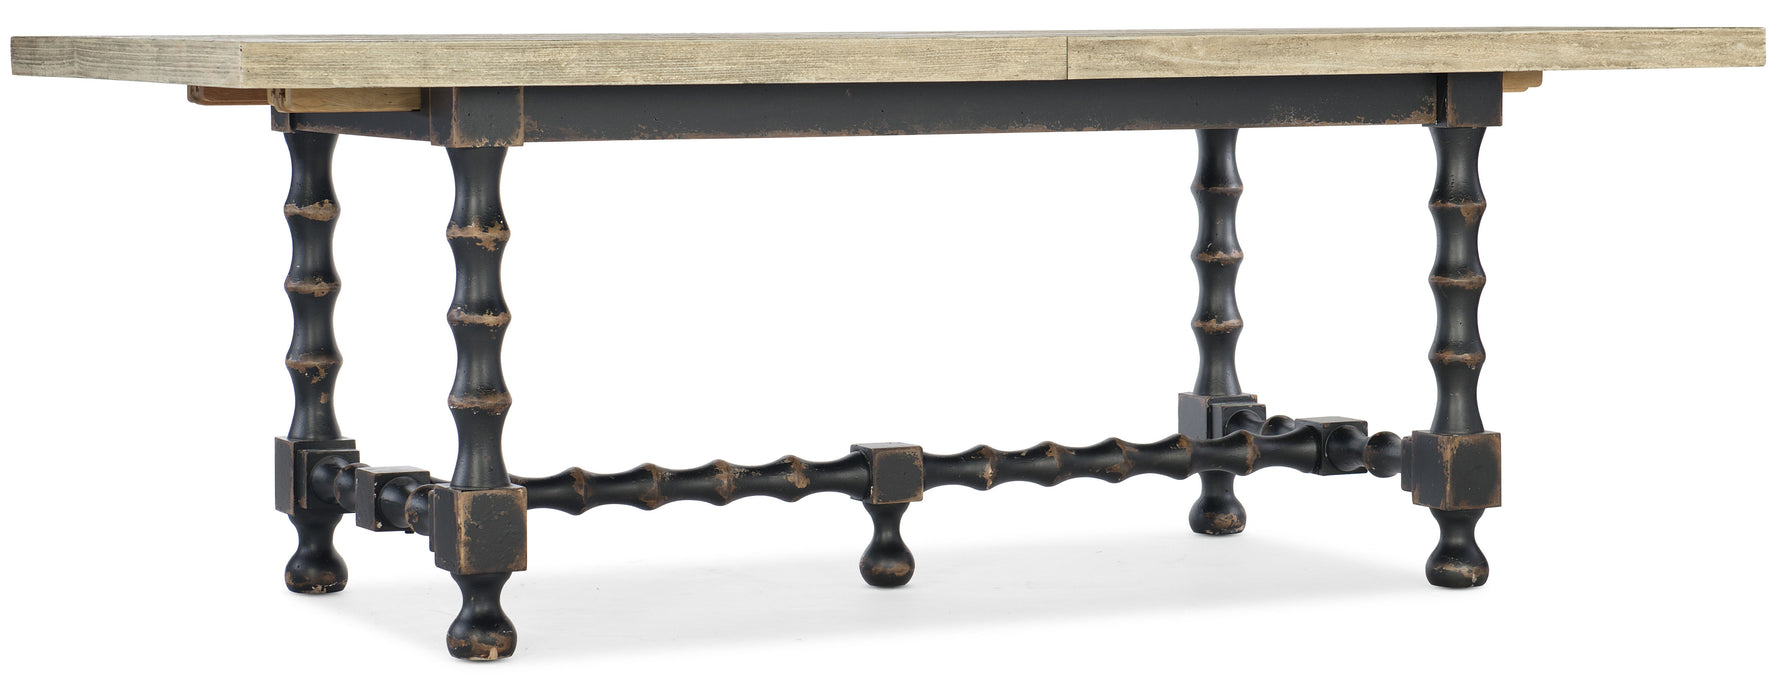 Ciao Bella - Trestle Dining Table